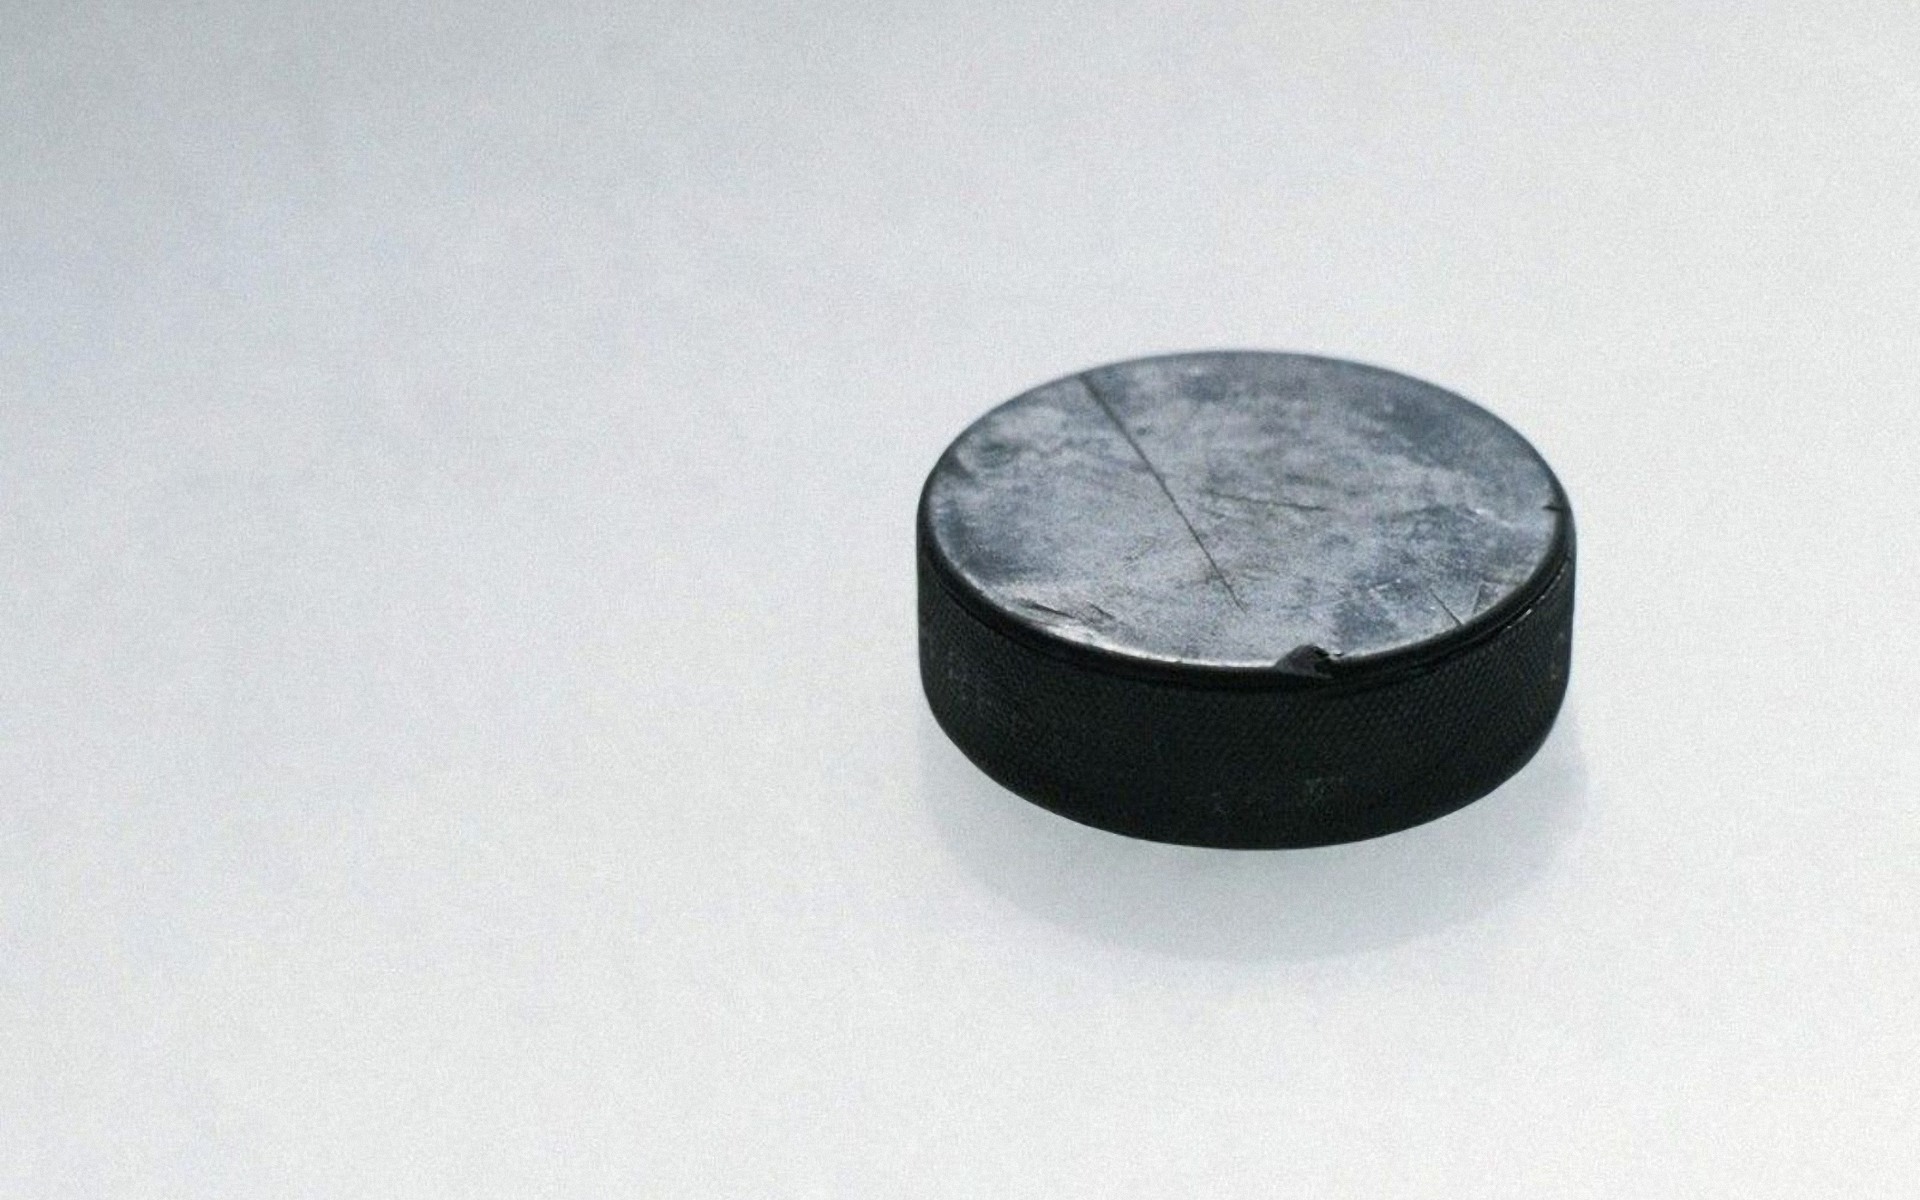 Hockey Puck Wallpaper Pictures